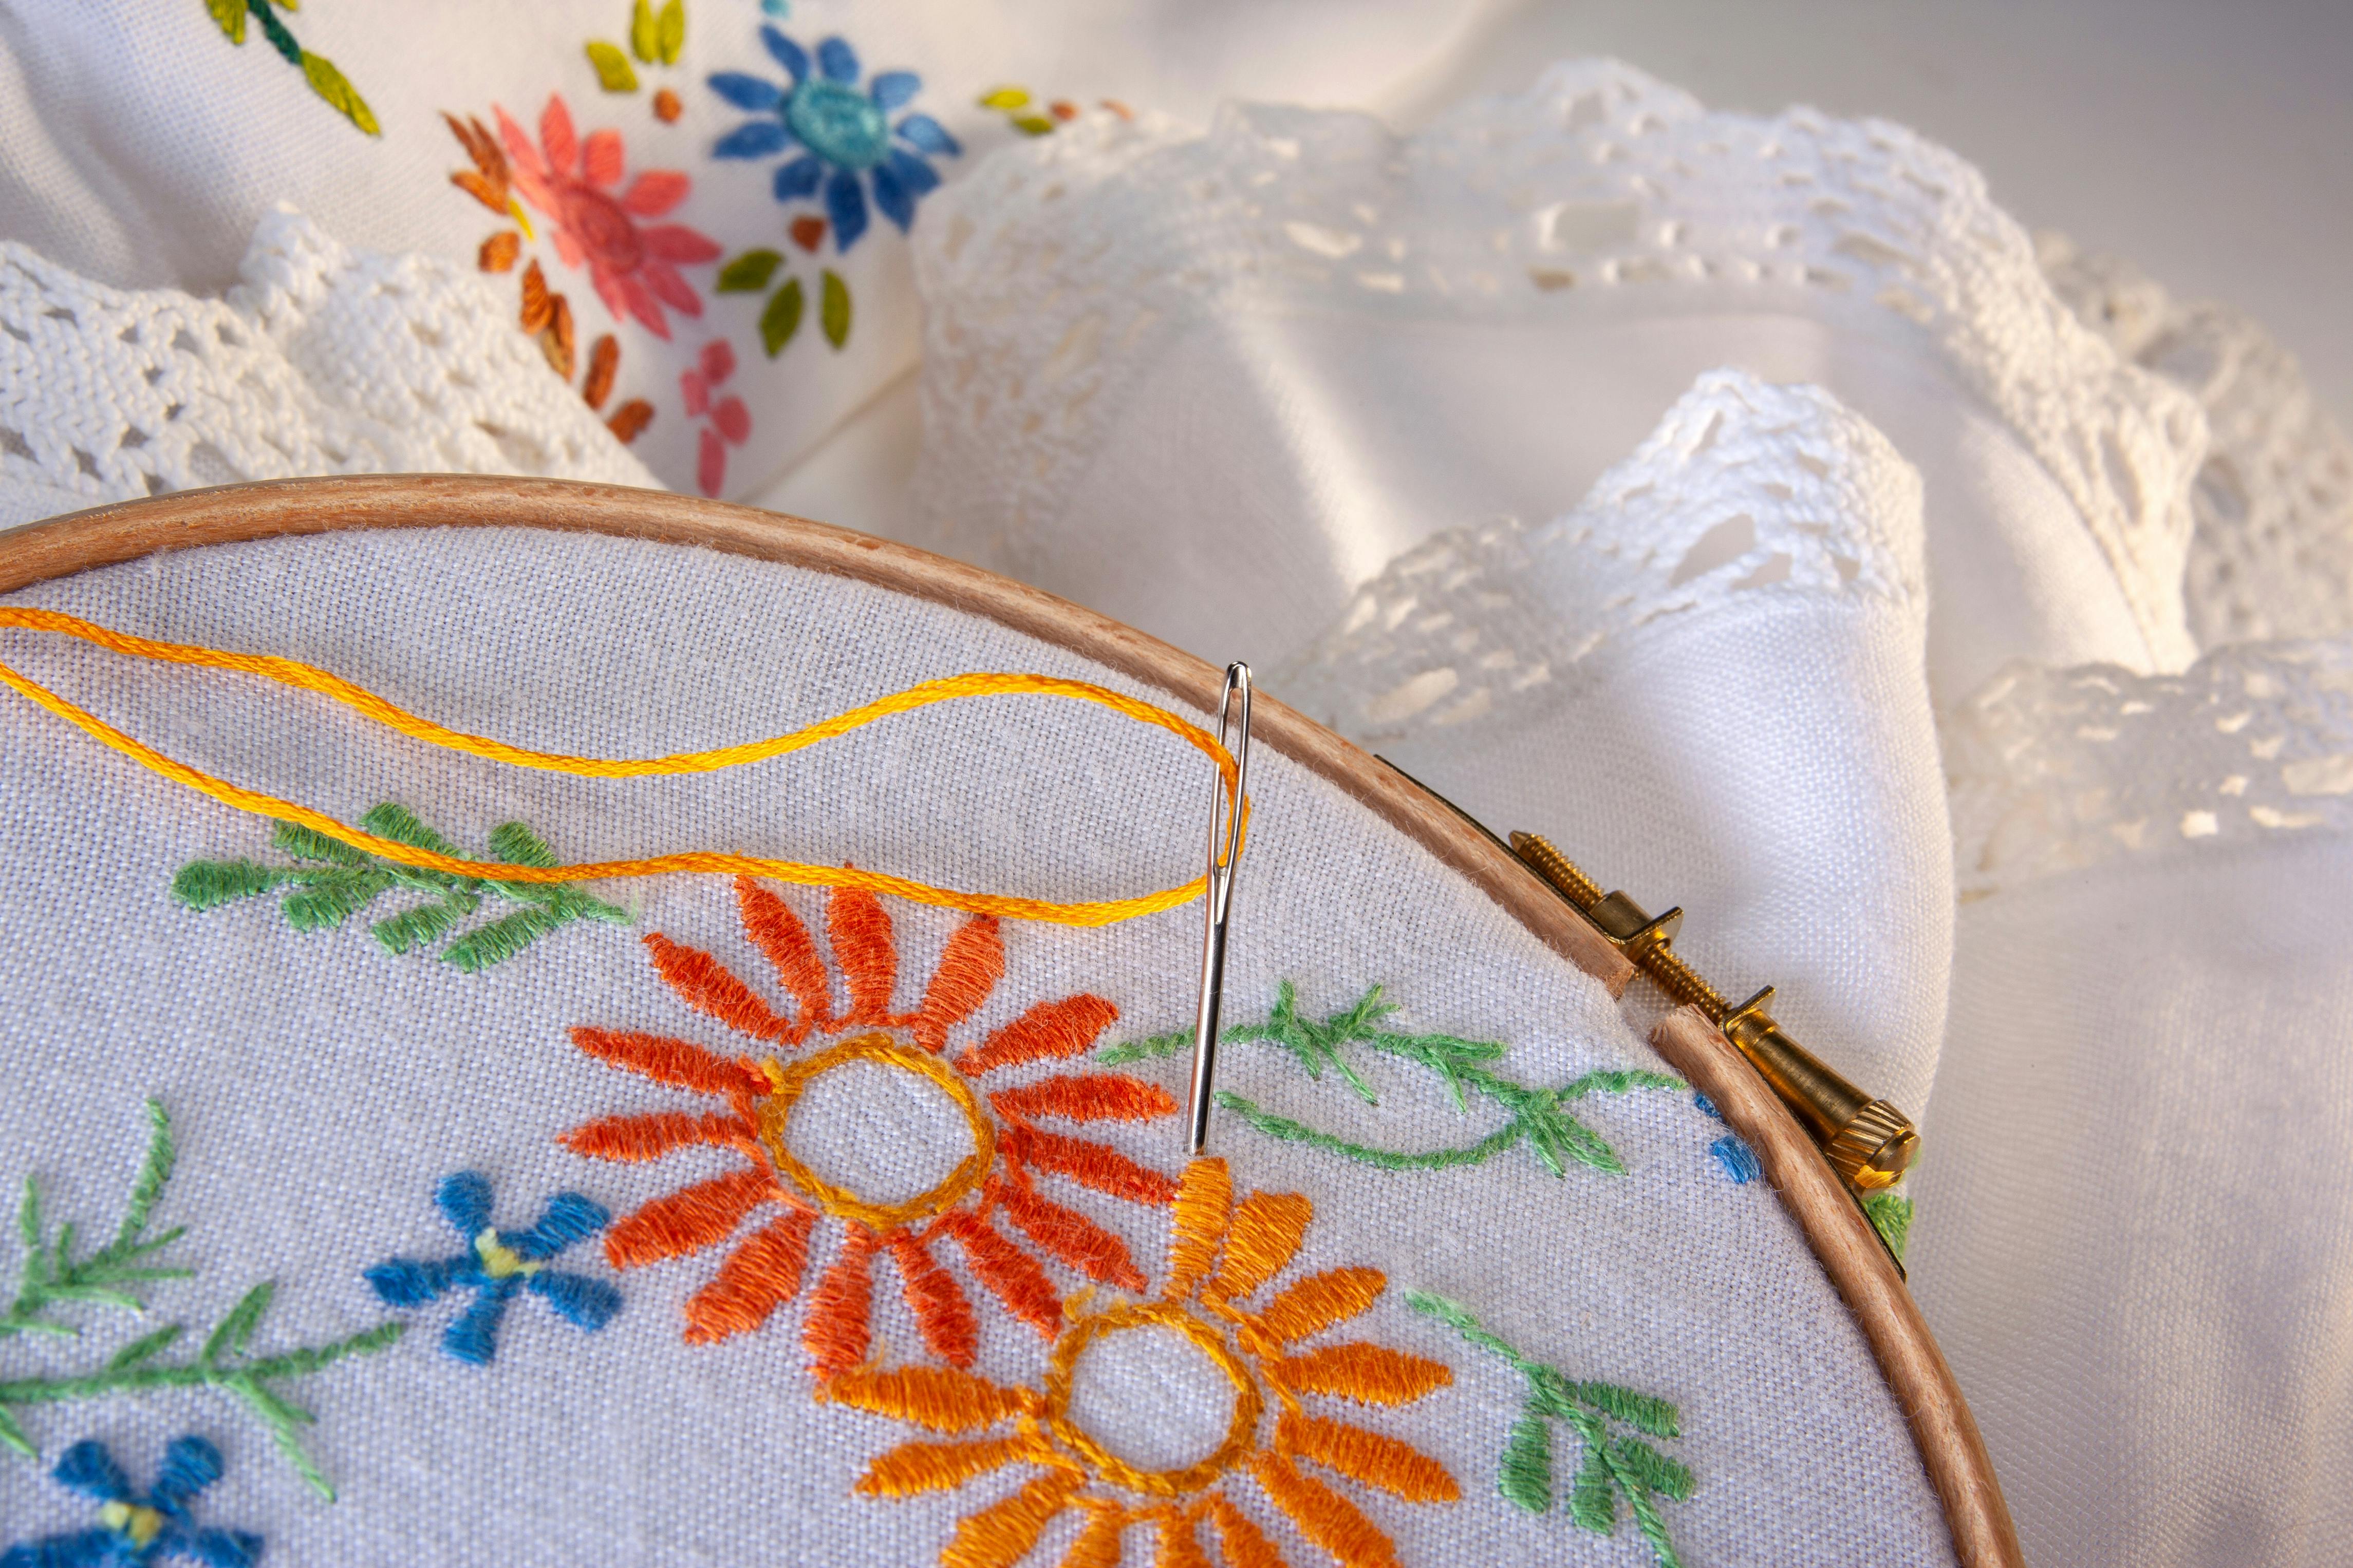  embroidery hoop with half finished embroidered flowers on lace